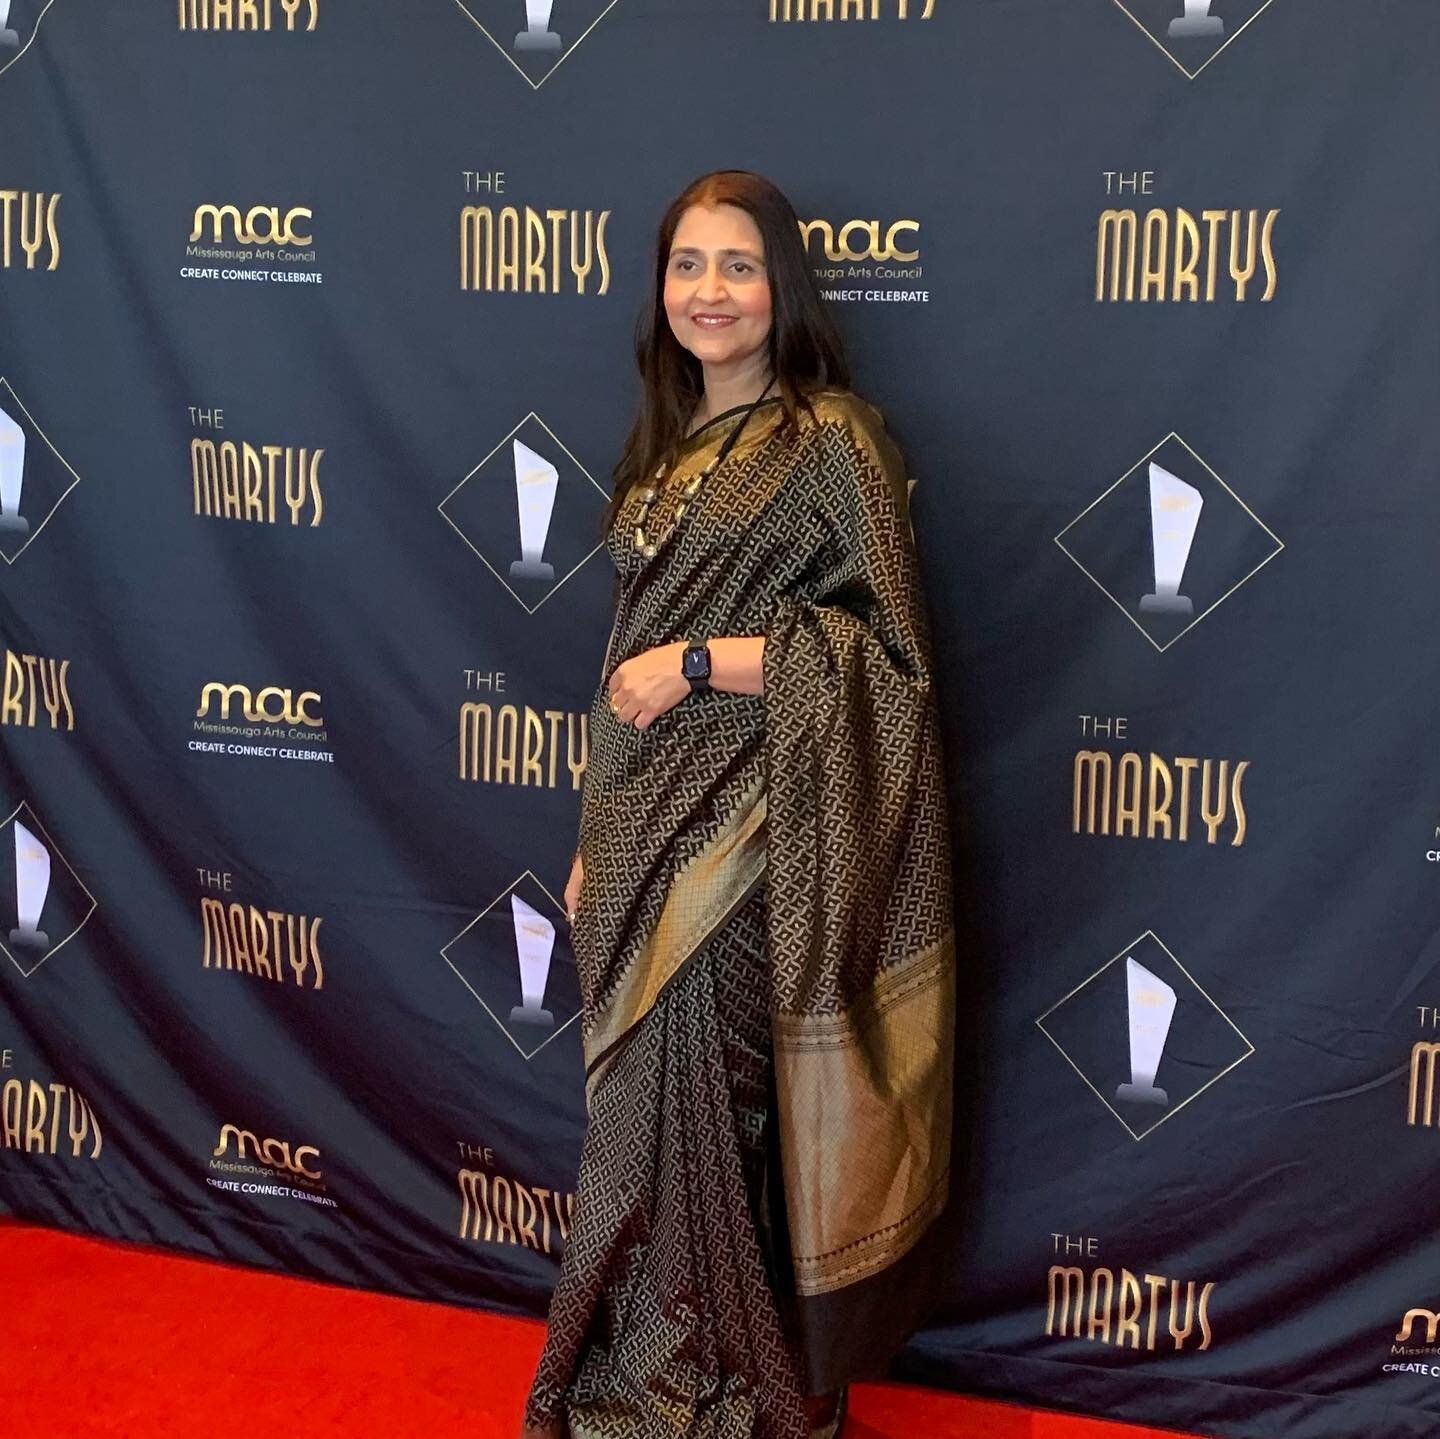 Honoured to be the Juror at the wonderful 28th Annual Art Award &lsquo;Martys&rsquo; presented by @mississauga.art in the Visual Art Traditional Forms. Swipe along to see the gorgeous winners in the emerging and established Visual Arts traditional fo